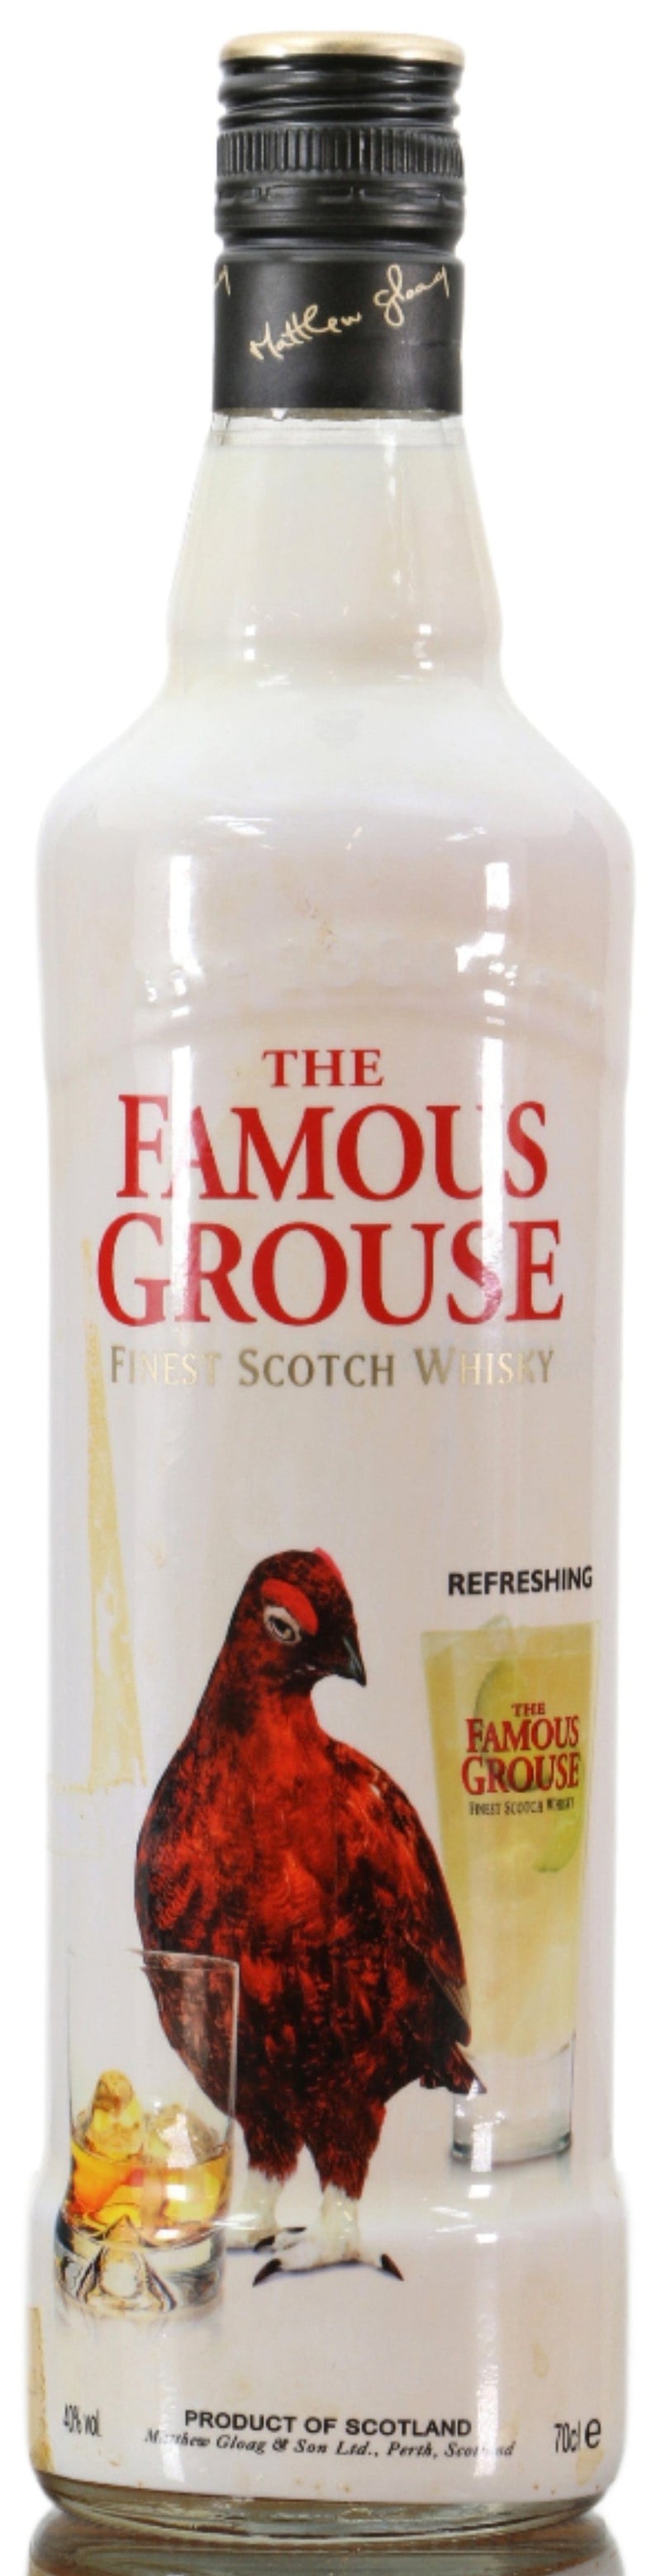 The Famous Grouse Old Finest Scotch Whisky 70cl